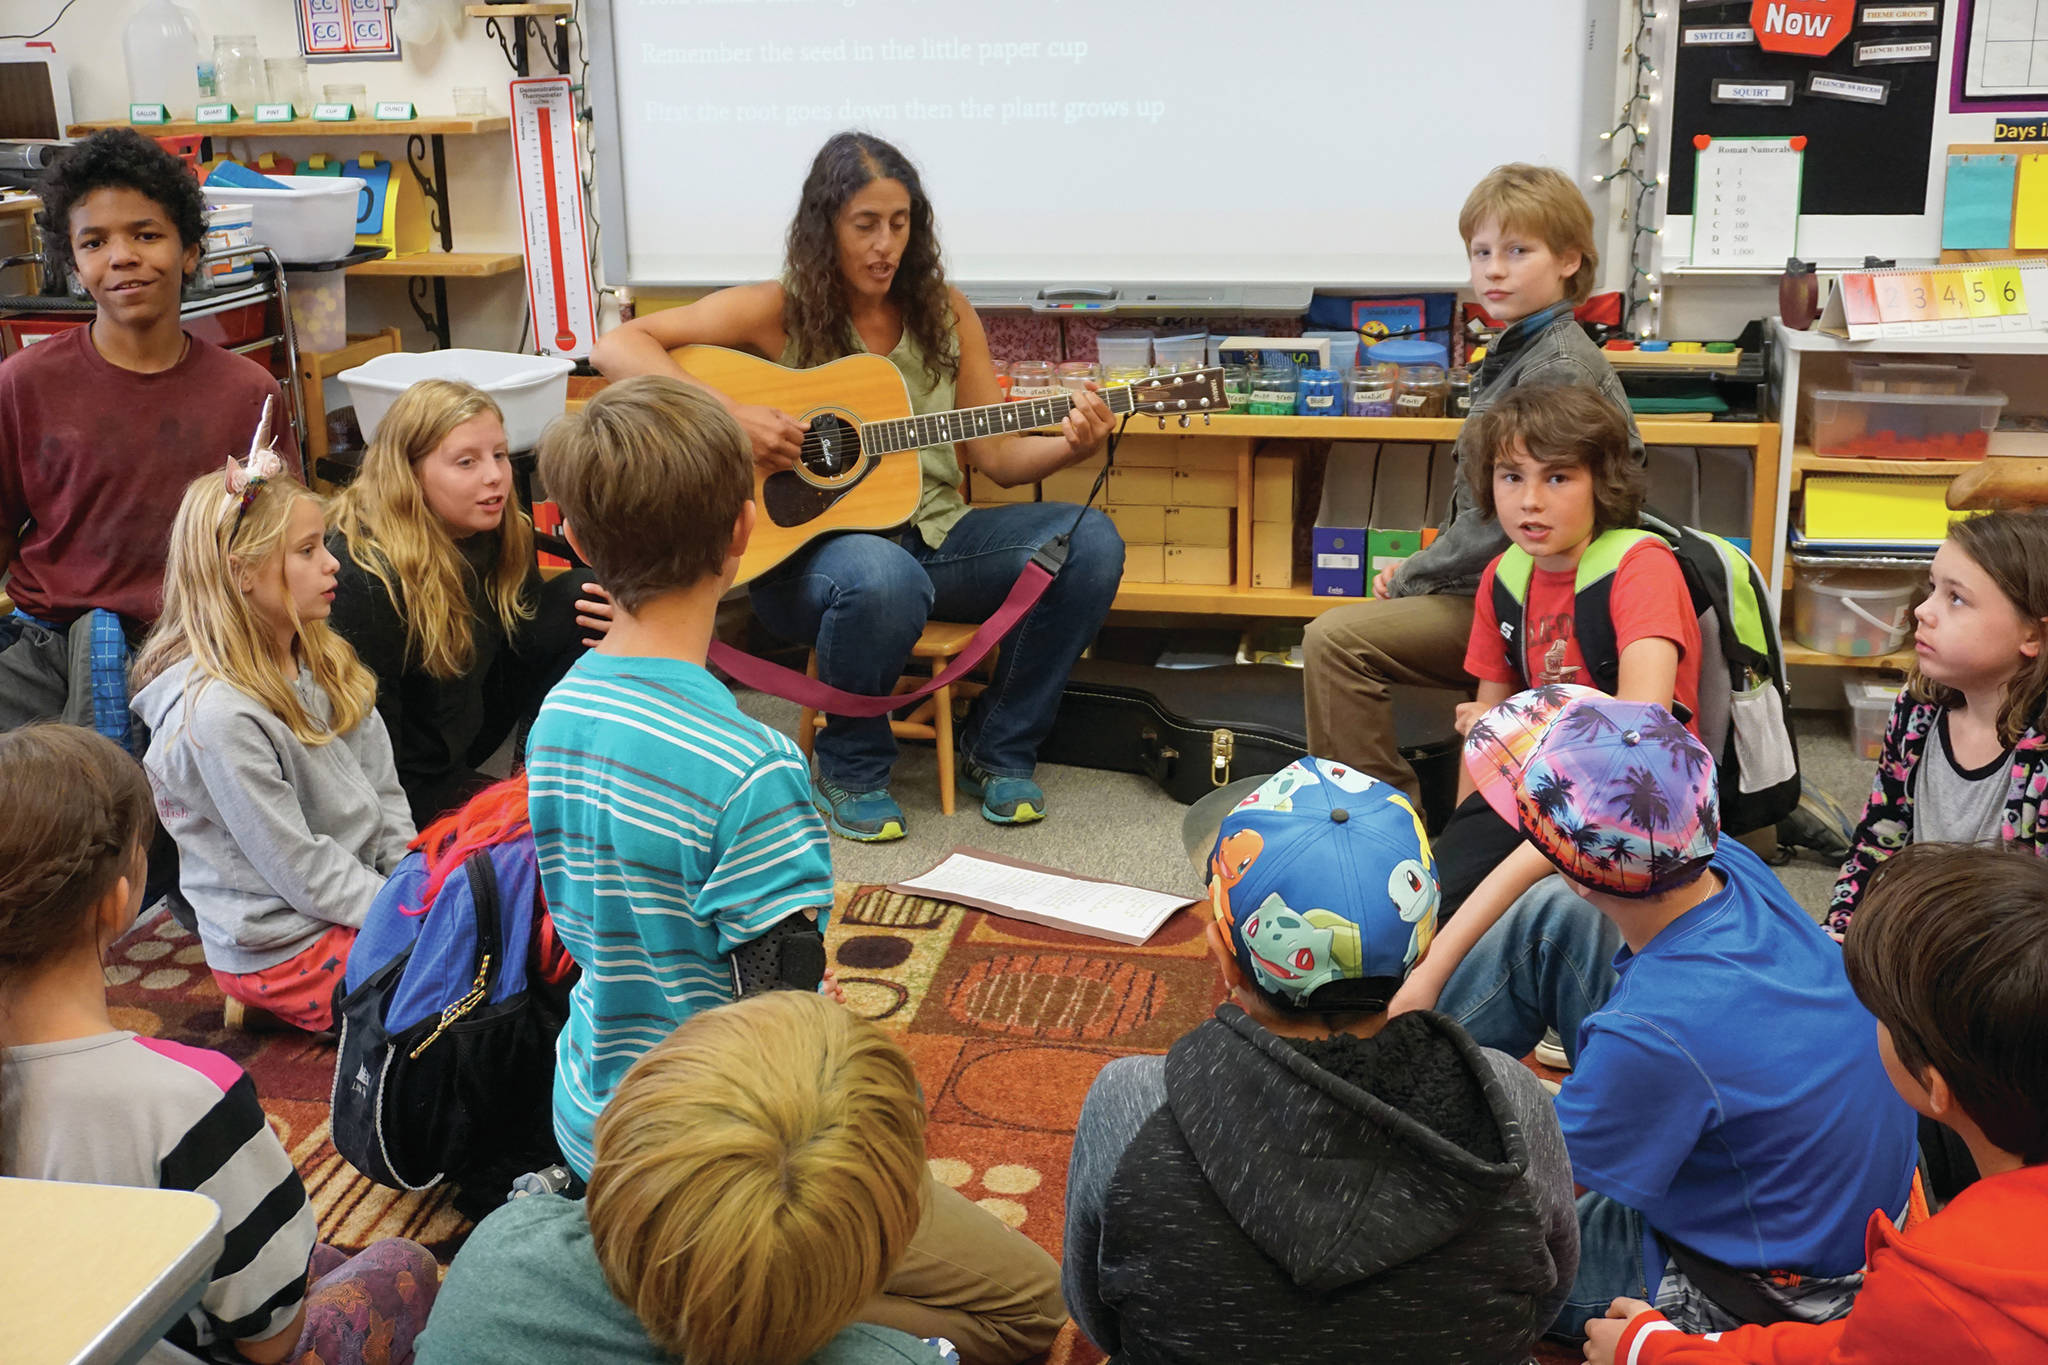 Fireweeed Academy teacher Stephanie Zuniga performs a song for her fifth- and sixth-grade students at the end of the first day of school on Tuesday, Aug. 20, 2019, in Homer, Alaska. (Photo by Michael Armstrong/Homer News)